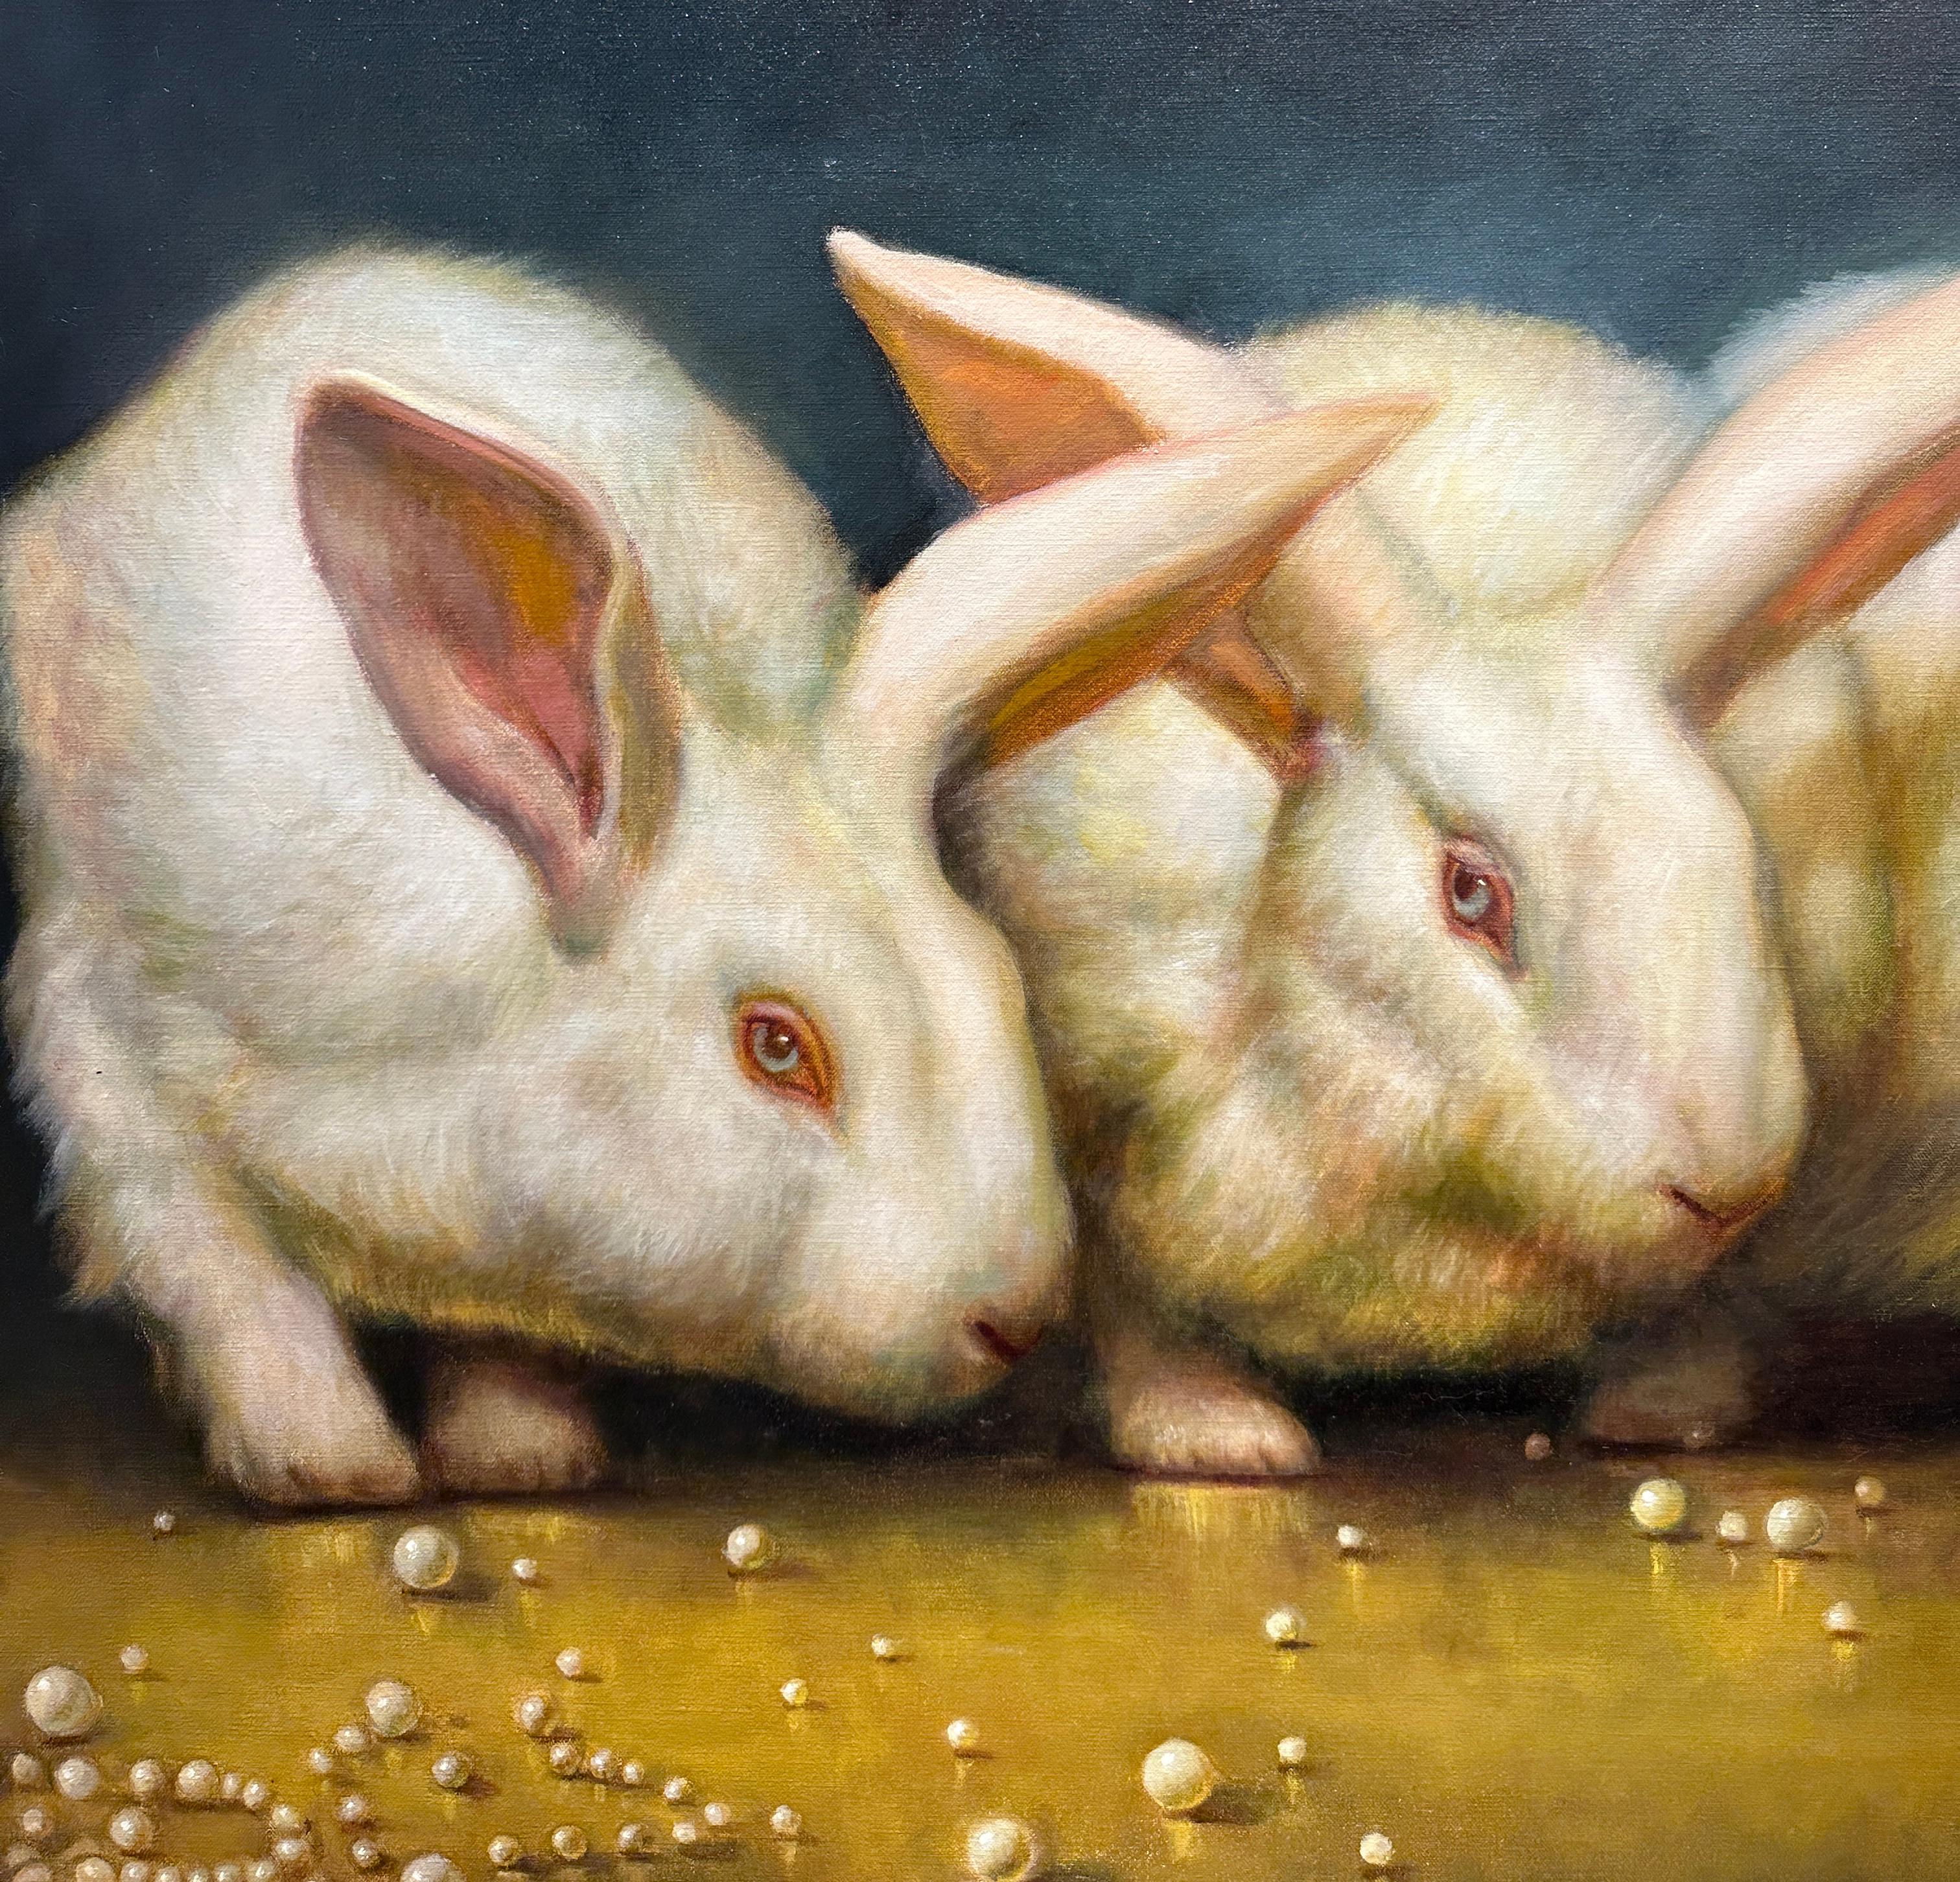 The Wise Ones - Three Rabbits Amongst a Broken Strand of Pearls, Original Oil - Painting by Rose Freymuth-Frazier